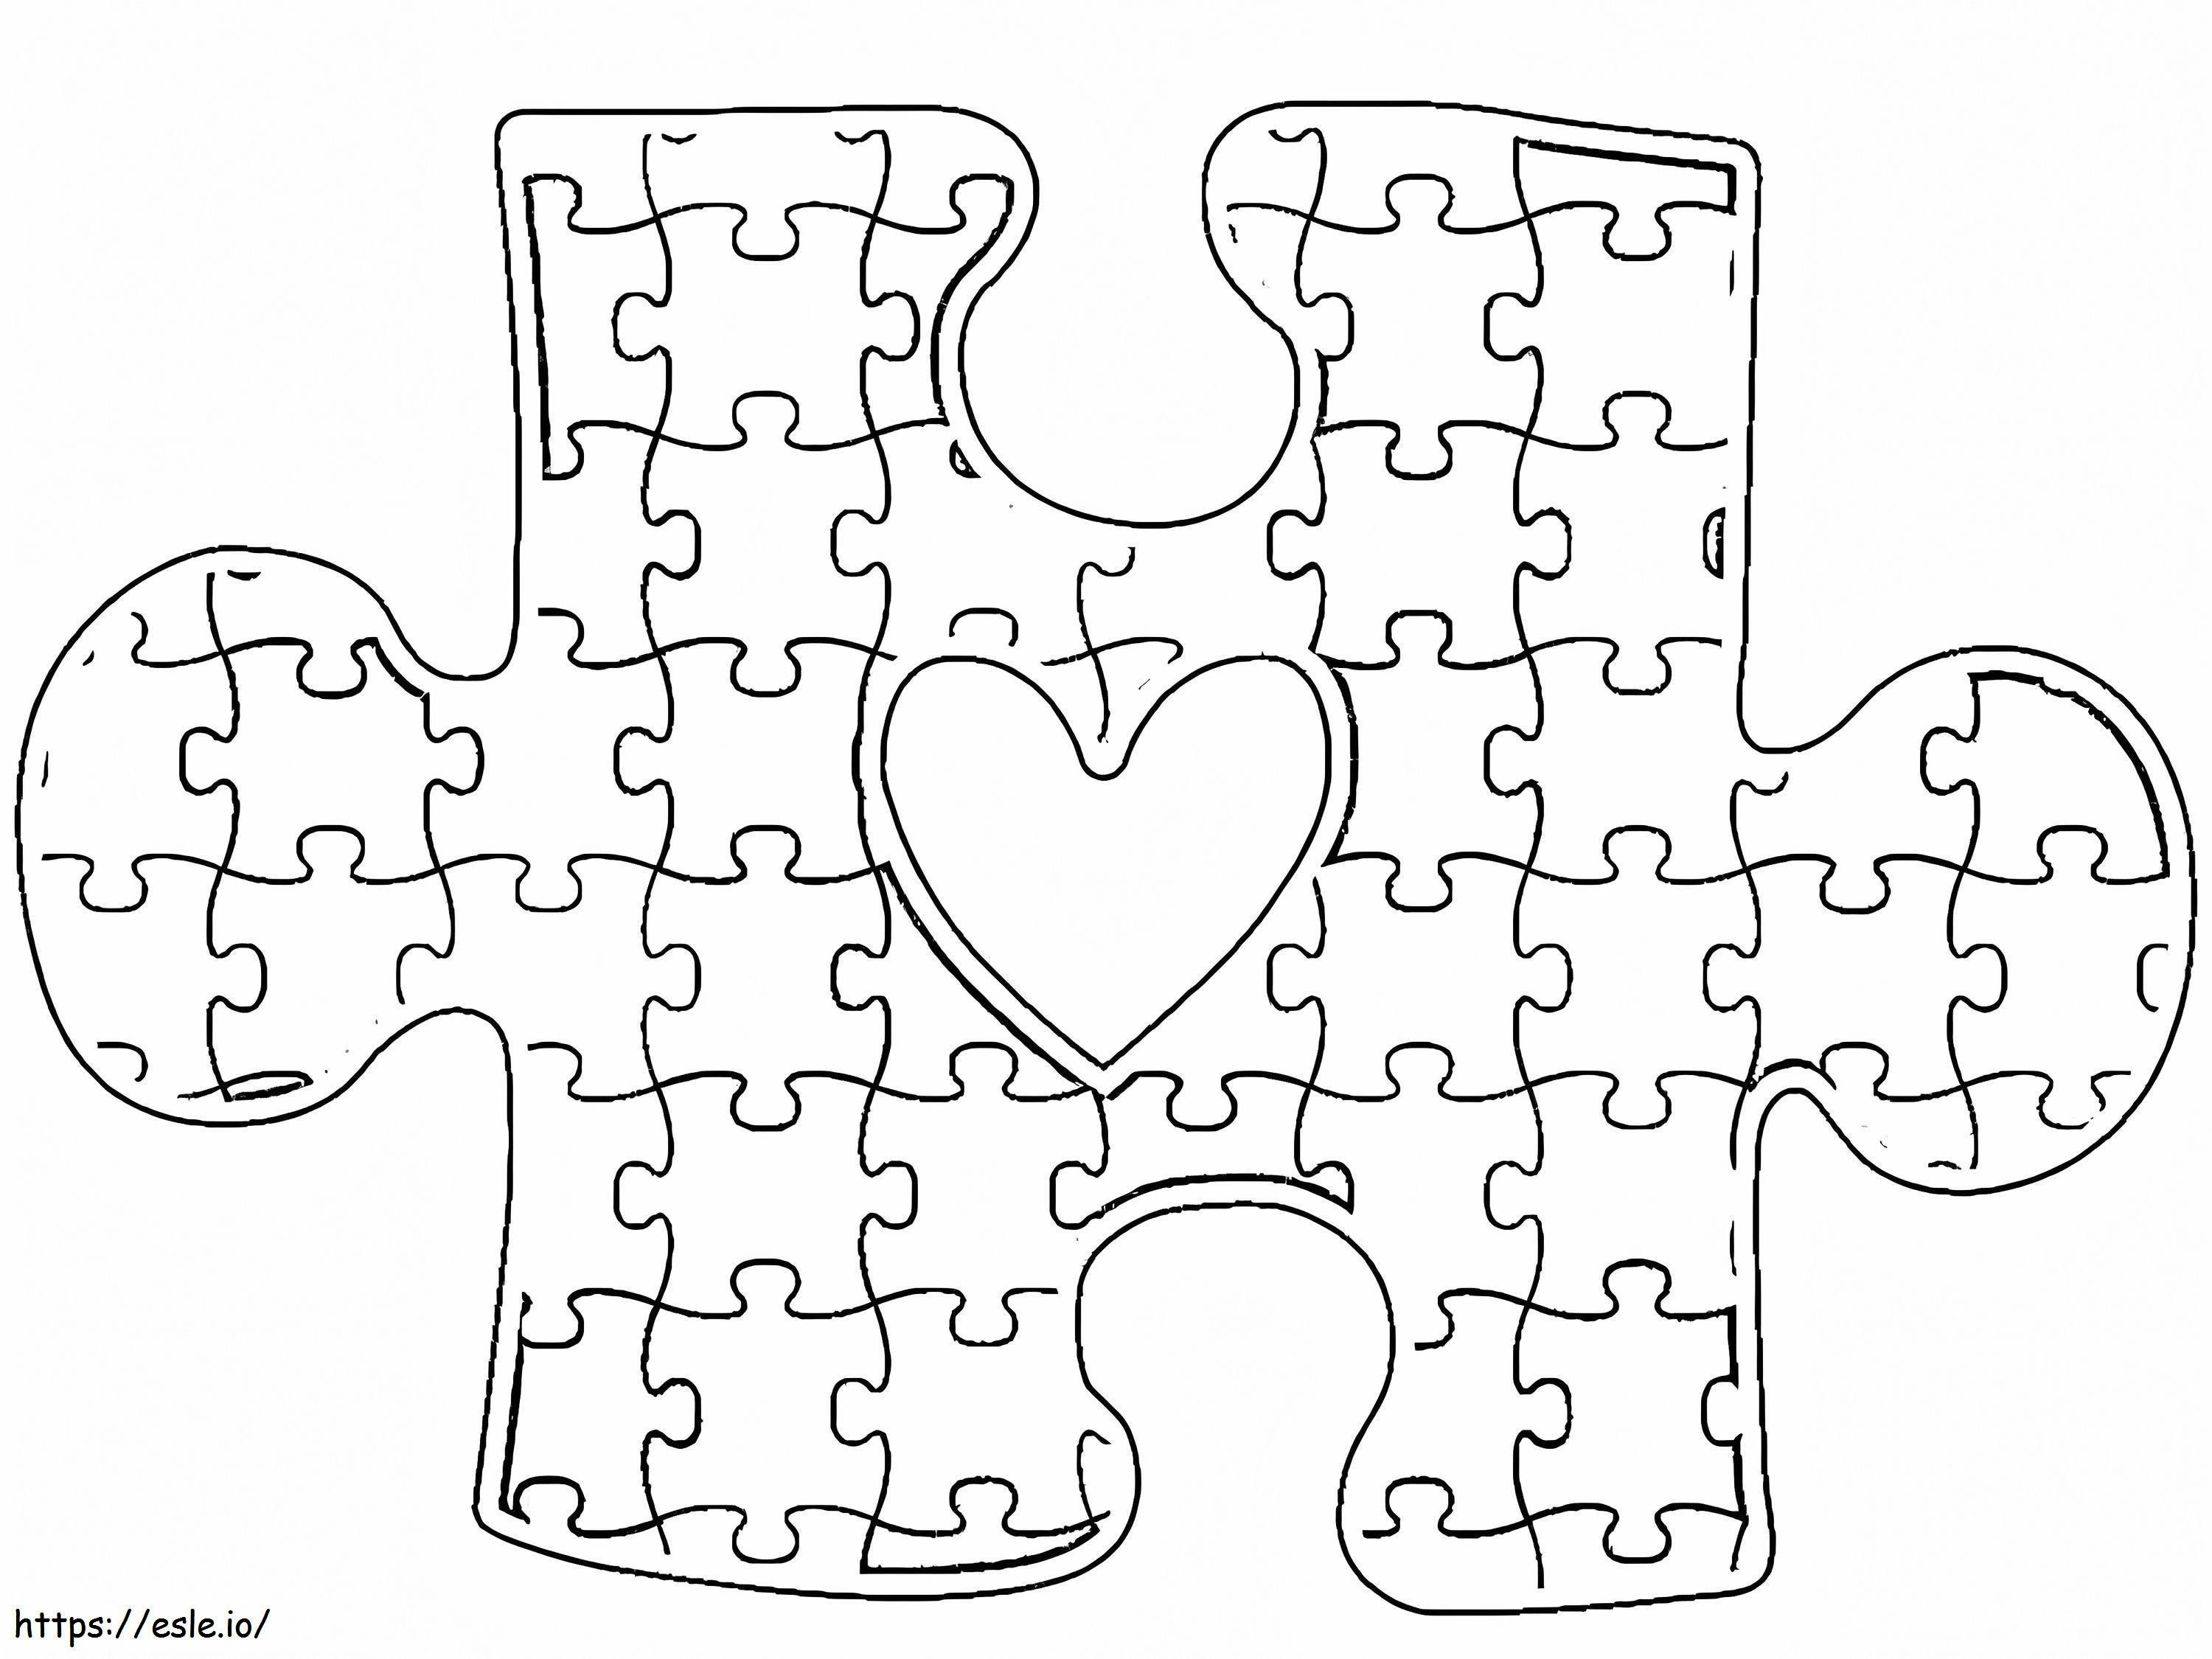 Puzzle Piece Autism Awareness coloring page